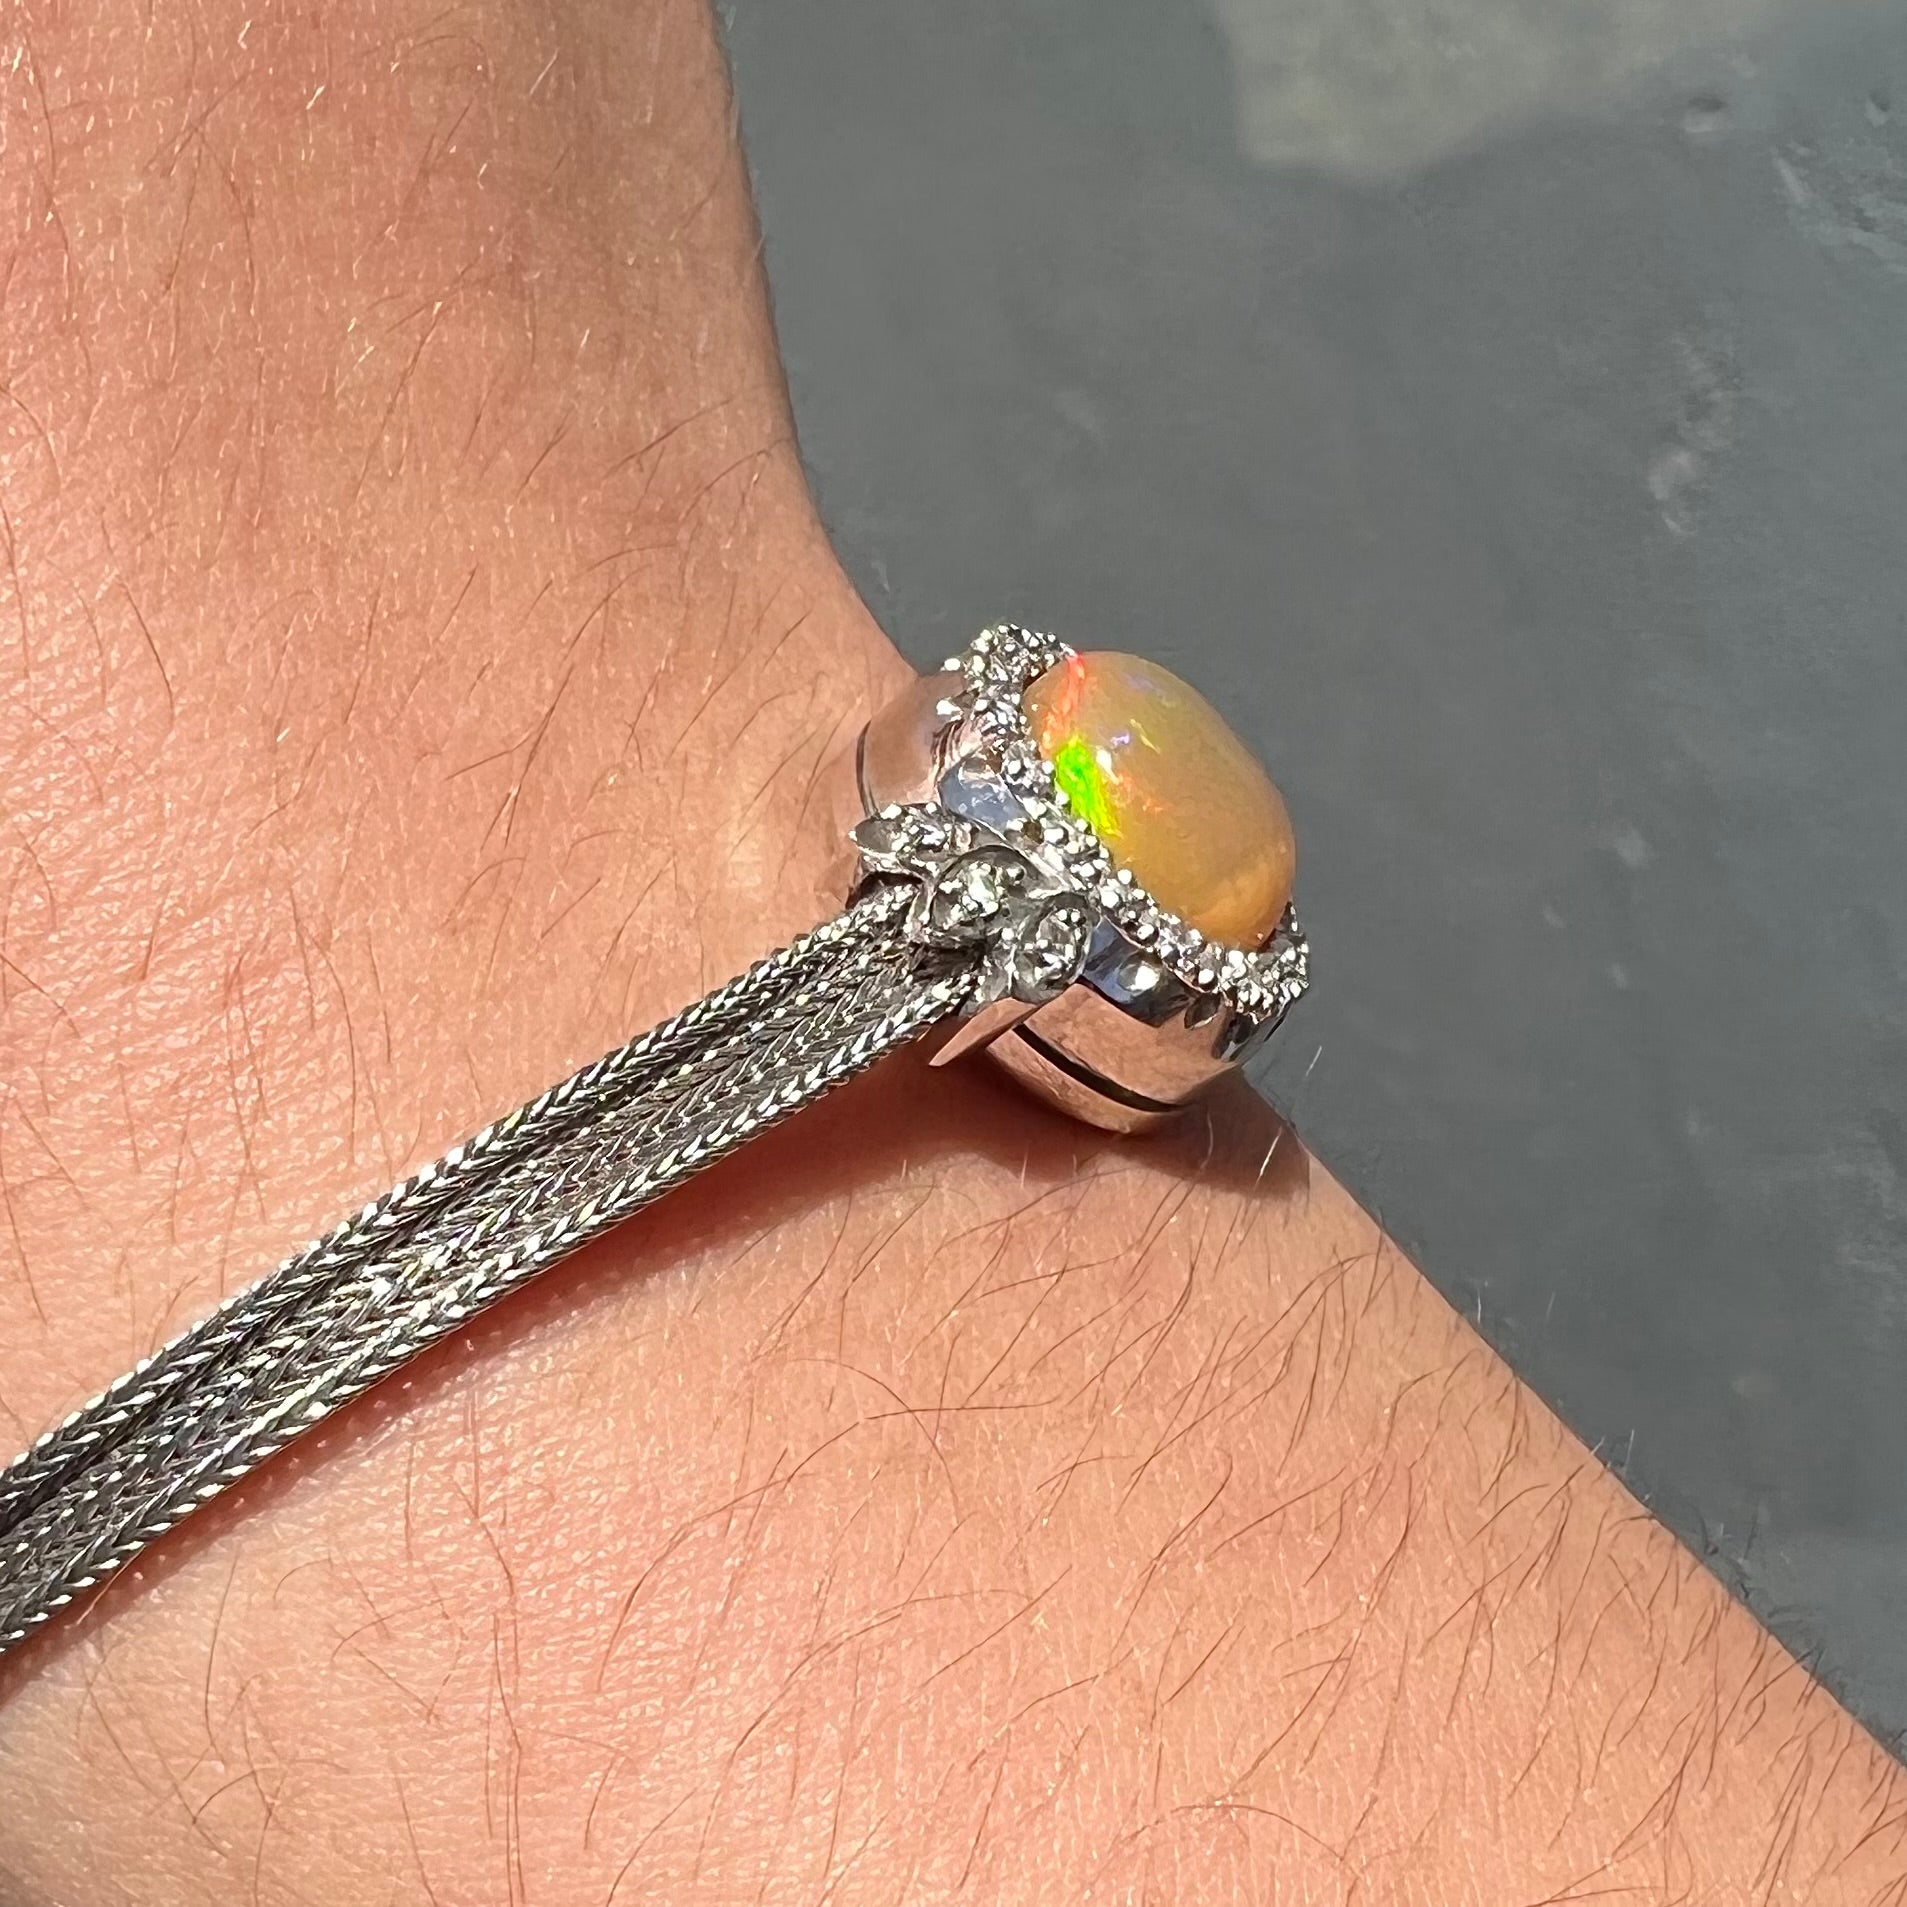 A Virgin Valley fire opal and diamond bracelet made from a vintage 1930's watch.